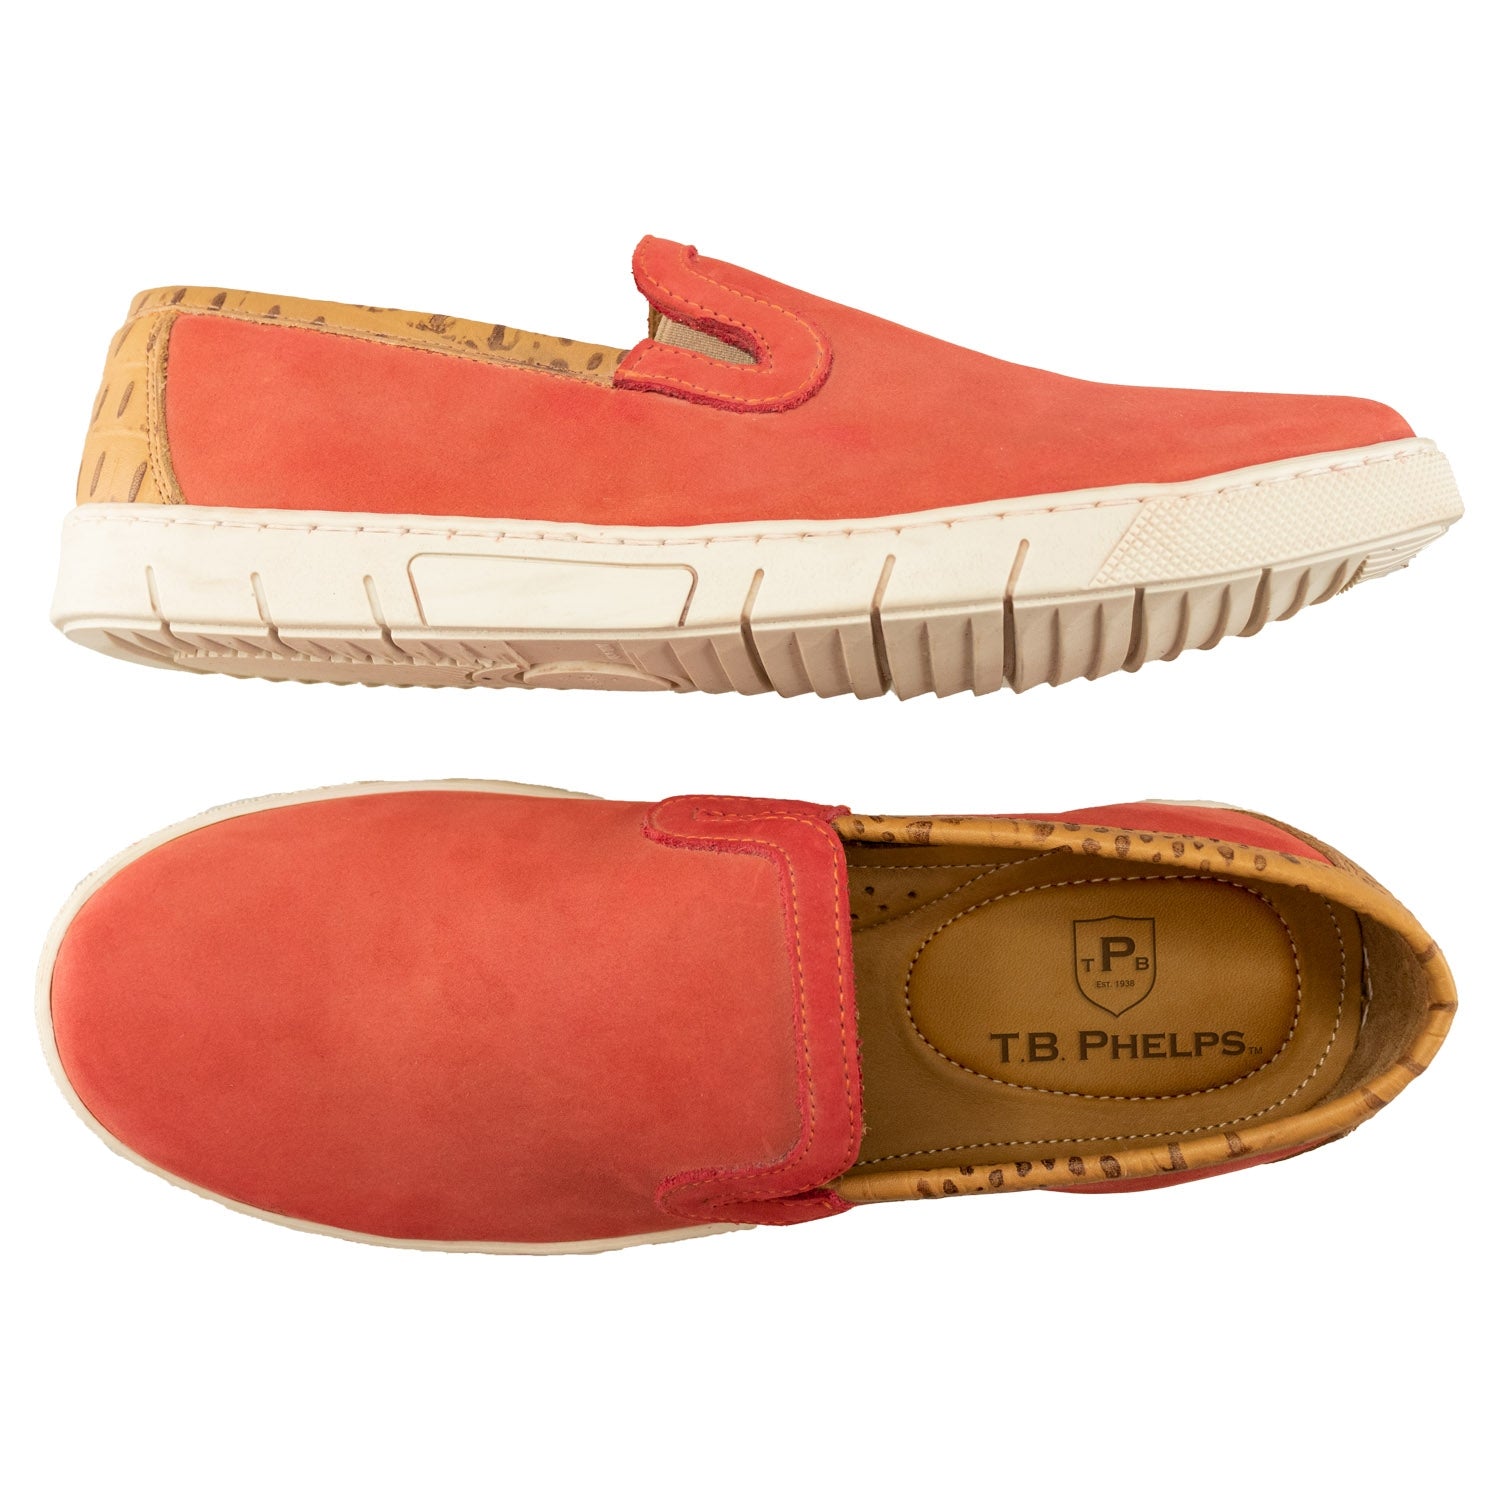 Scottsdale Slip on in Faded Red Nubuck by T.B. Phelps